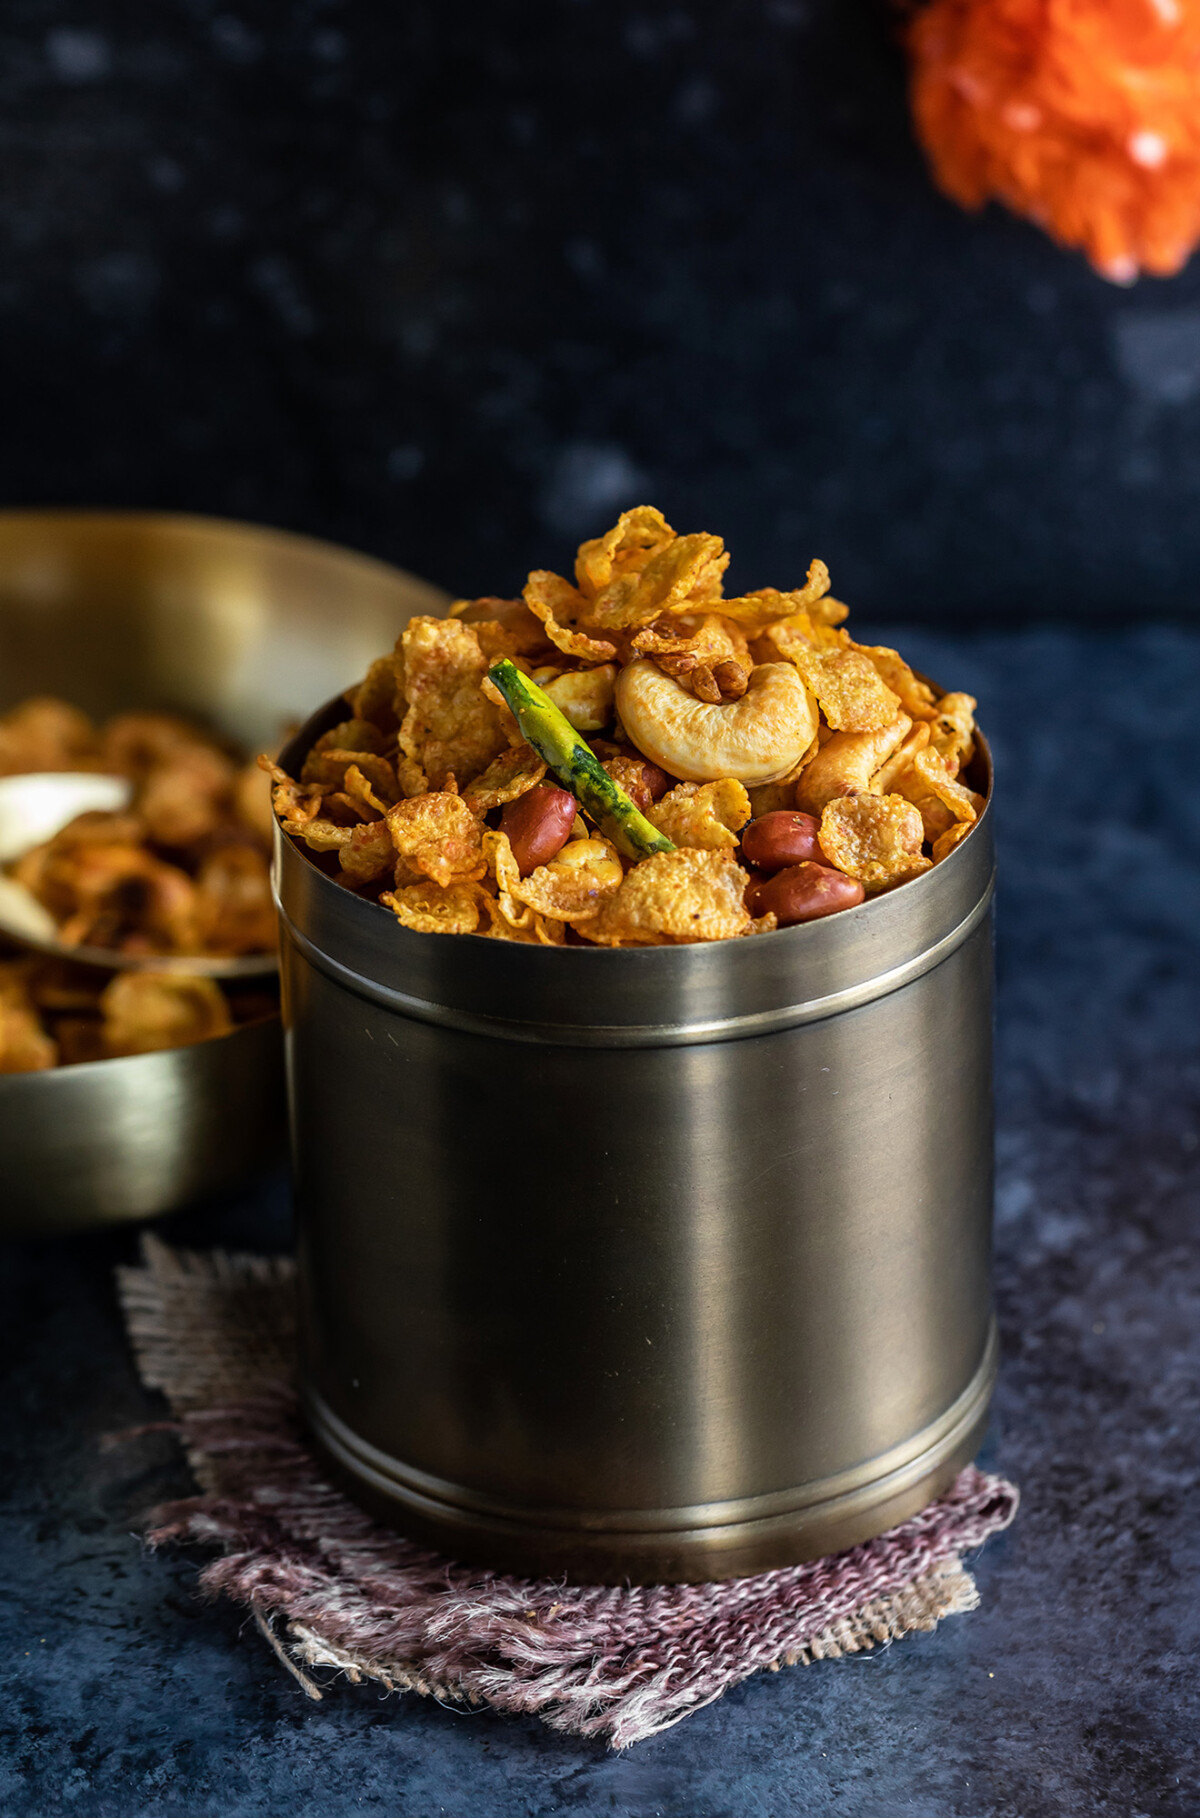 cornflakes chivda served in a copper container